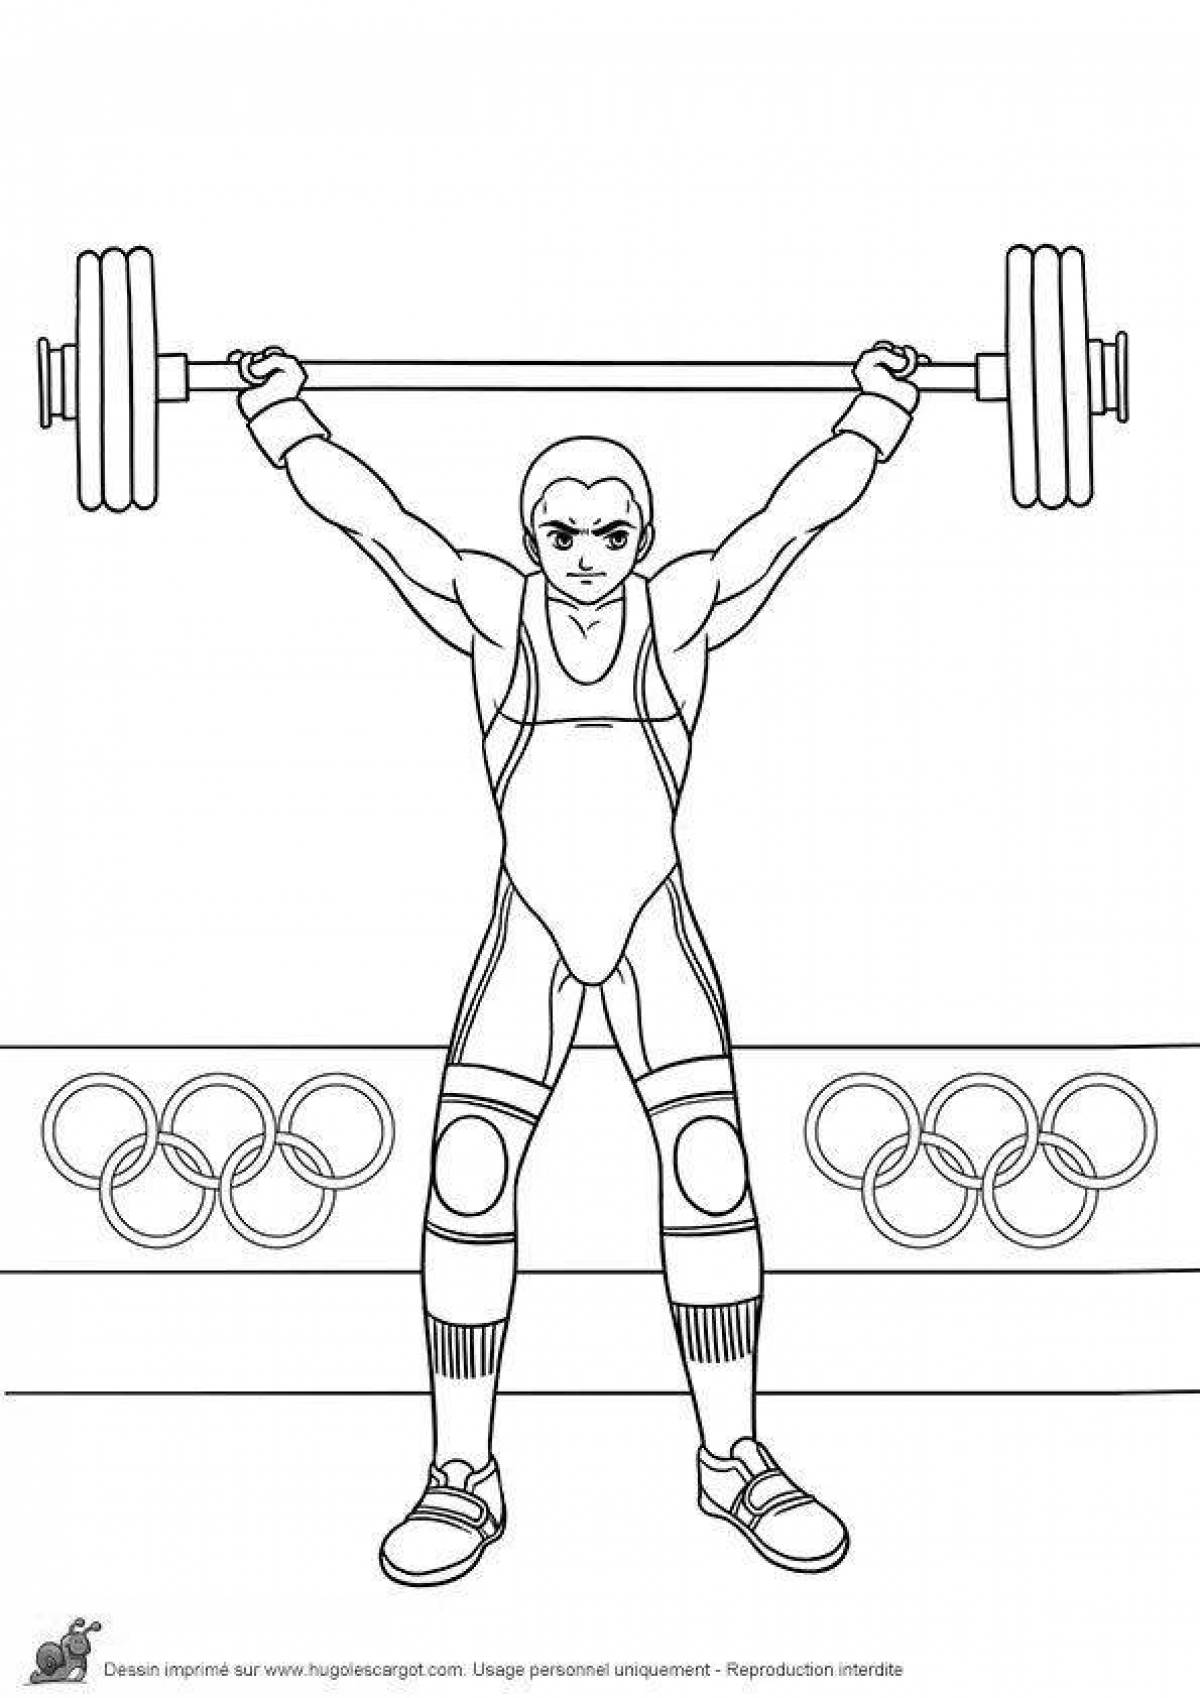 Coloring pages of athletes